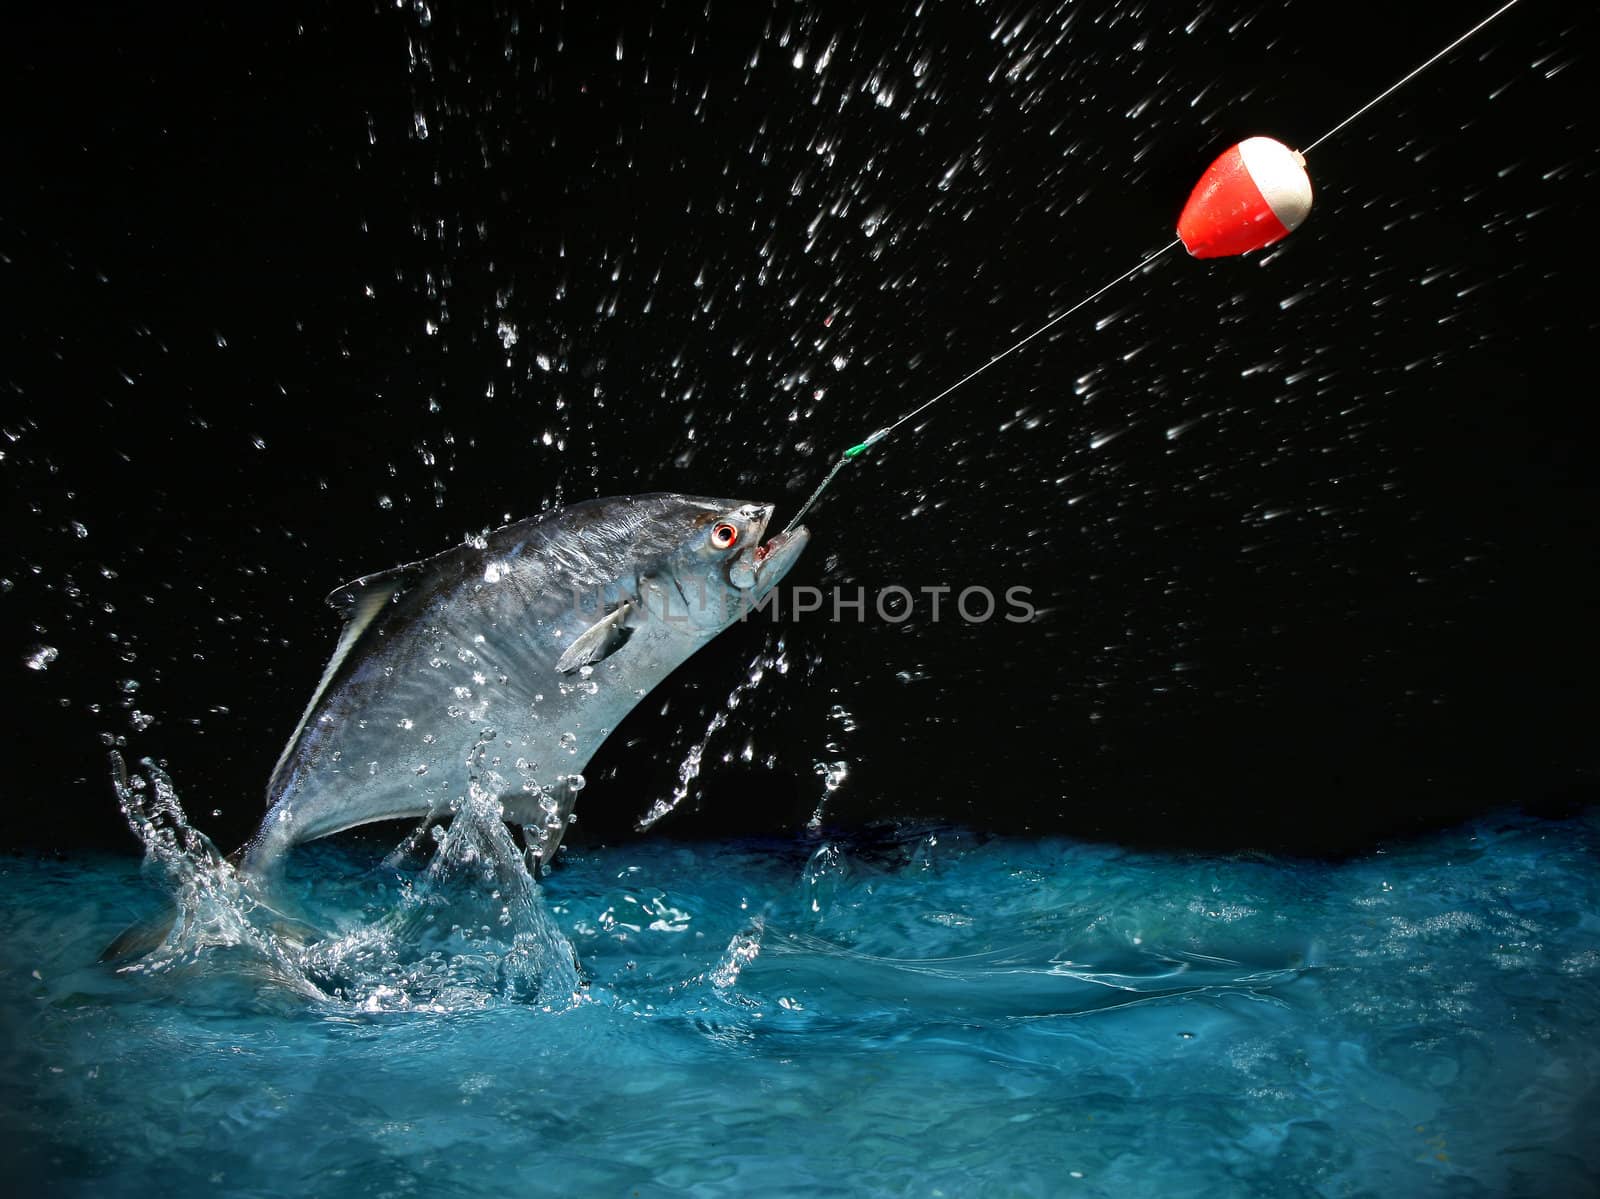 Catching a big fish with a fishing pole at night